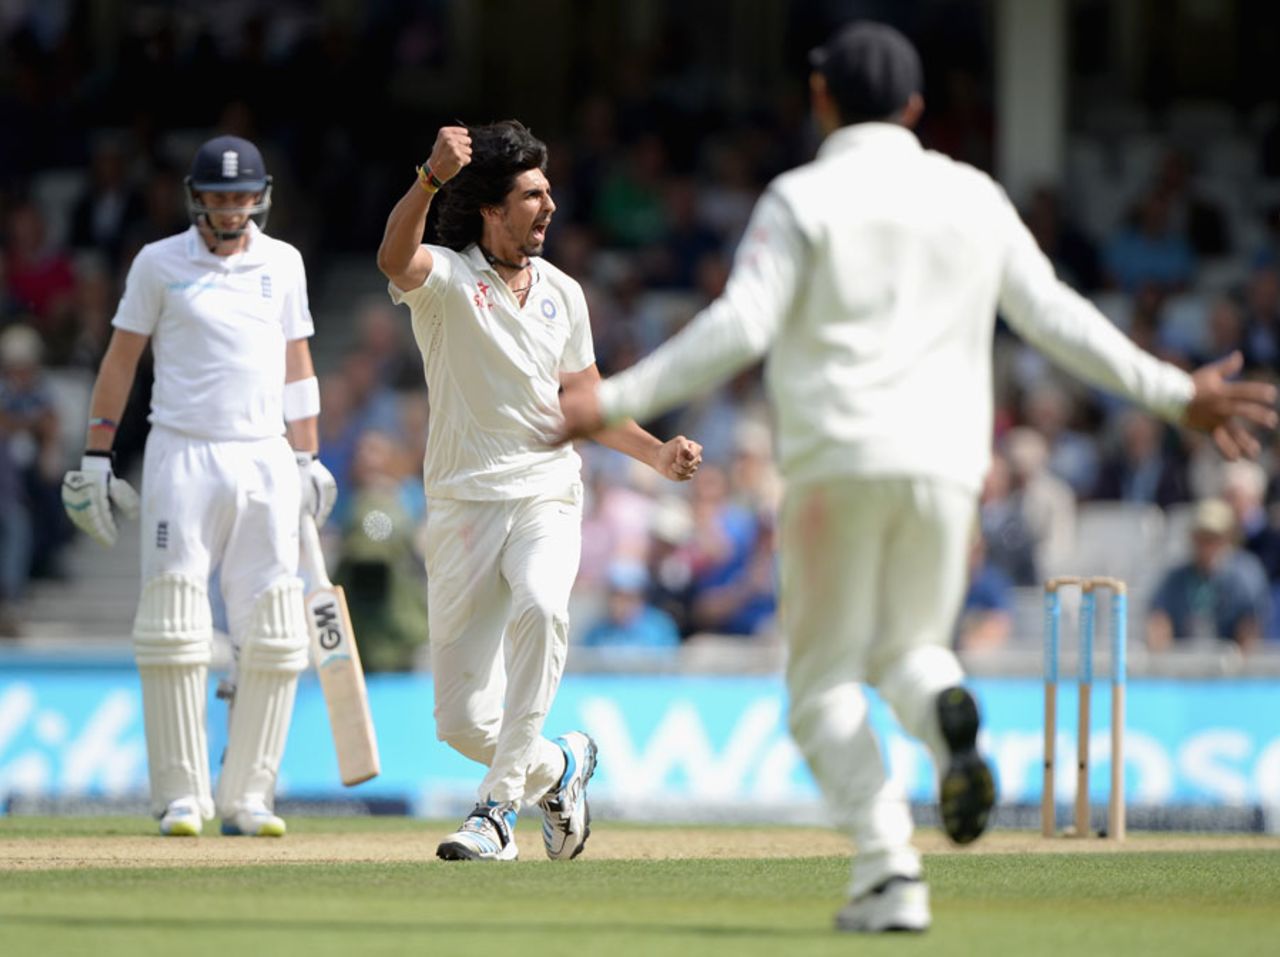 Ishant Sharma got rid of Ian Bell with a ripper, England v India, 5th Investec Test, The Oval, 2nd day, August 16, 2014